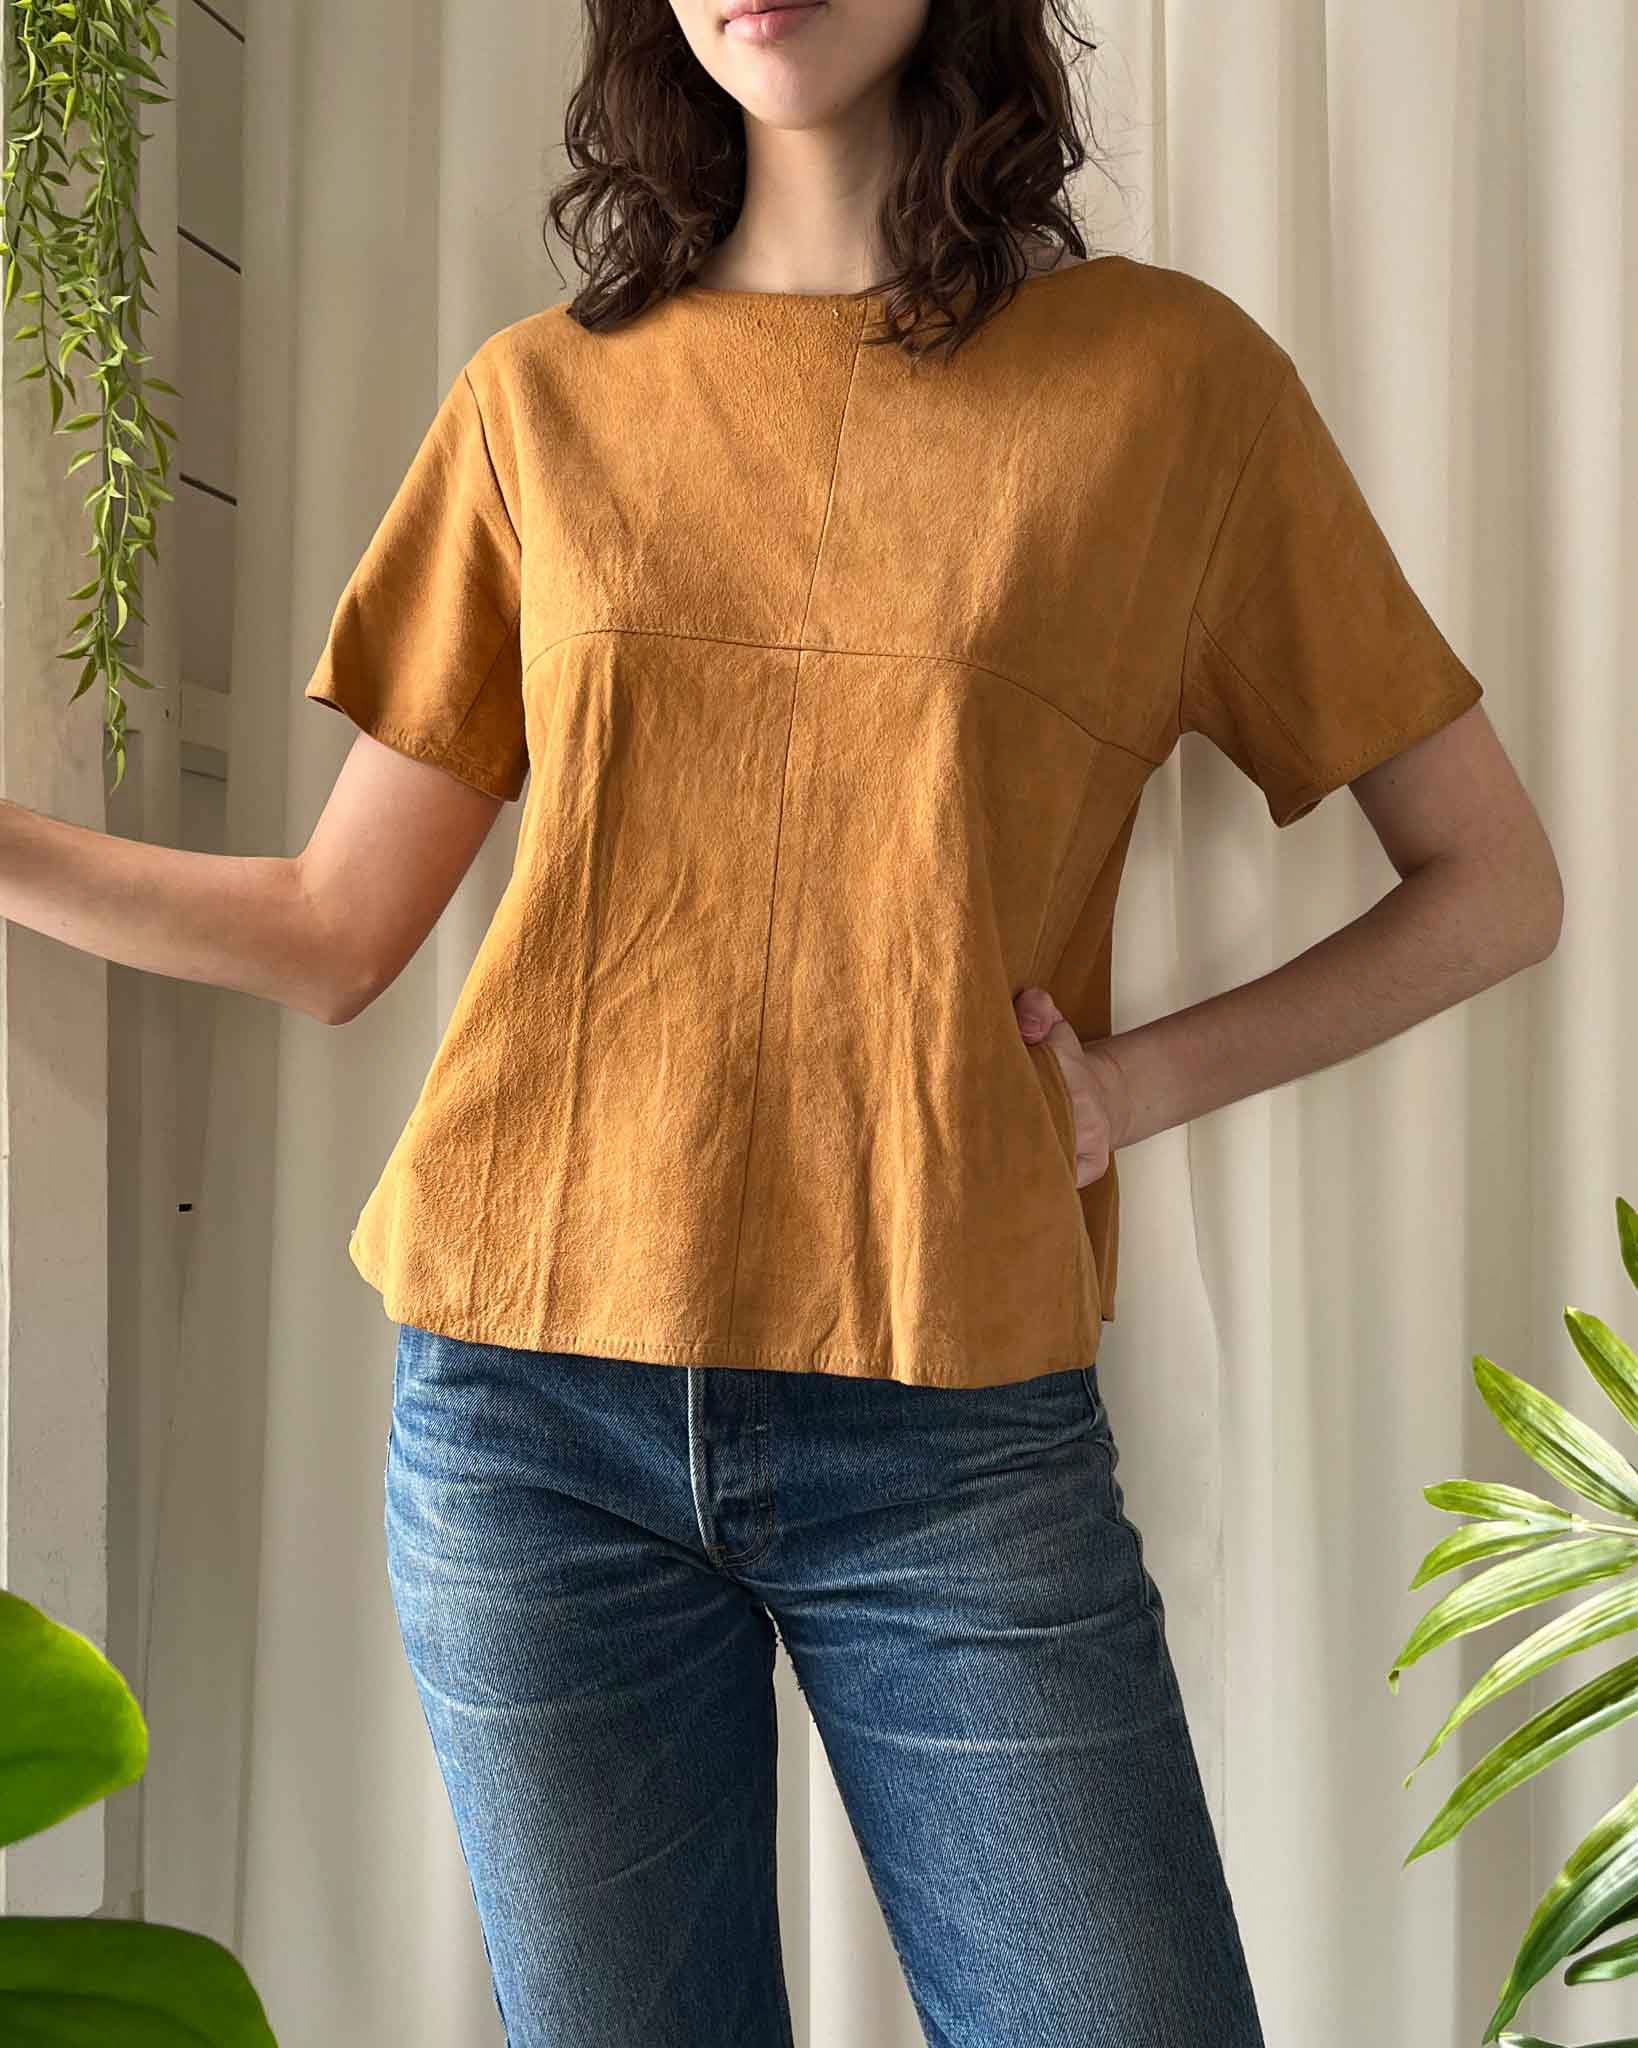 90s Soft Suede Leather Top